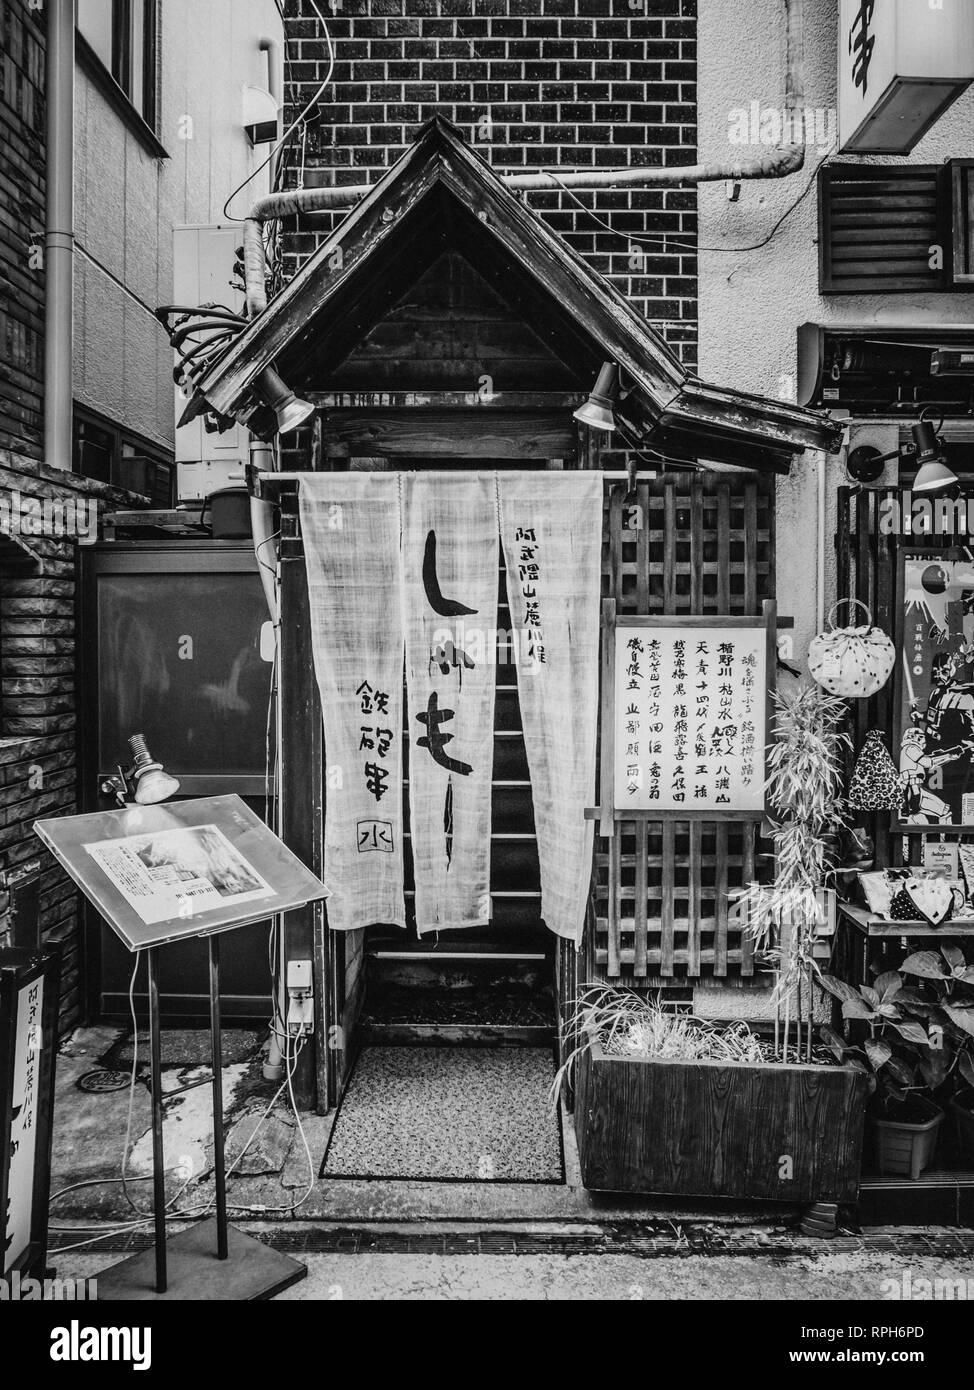 Entrance to a traditional Japanese restaurant - TOKYO / JAPAN - JUNE 12, 2018 Stock Photo